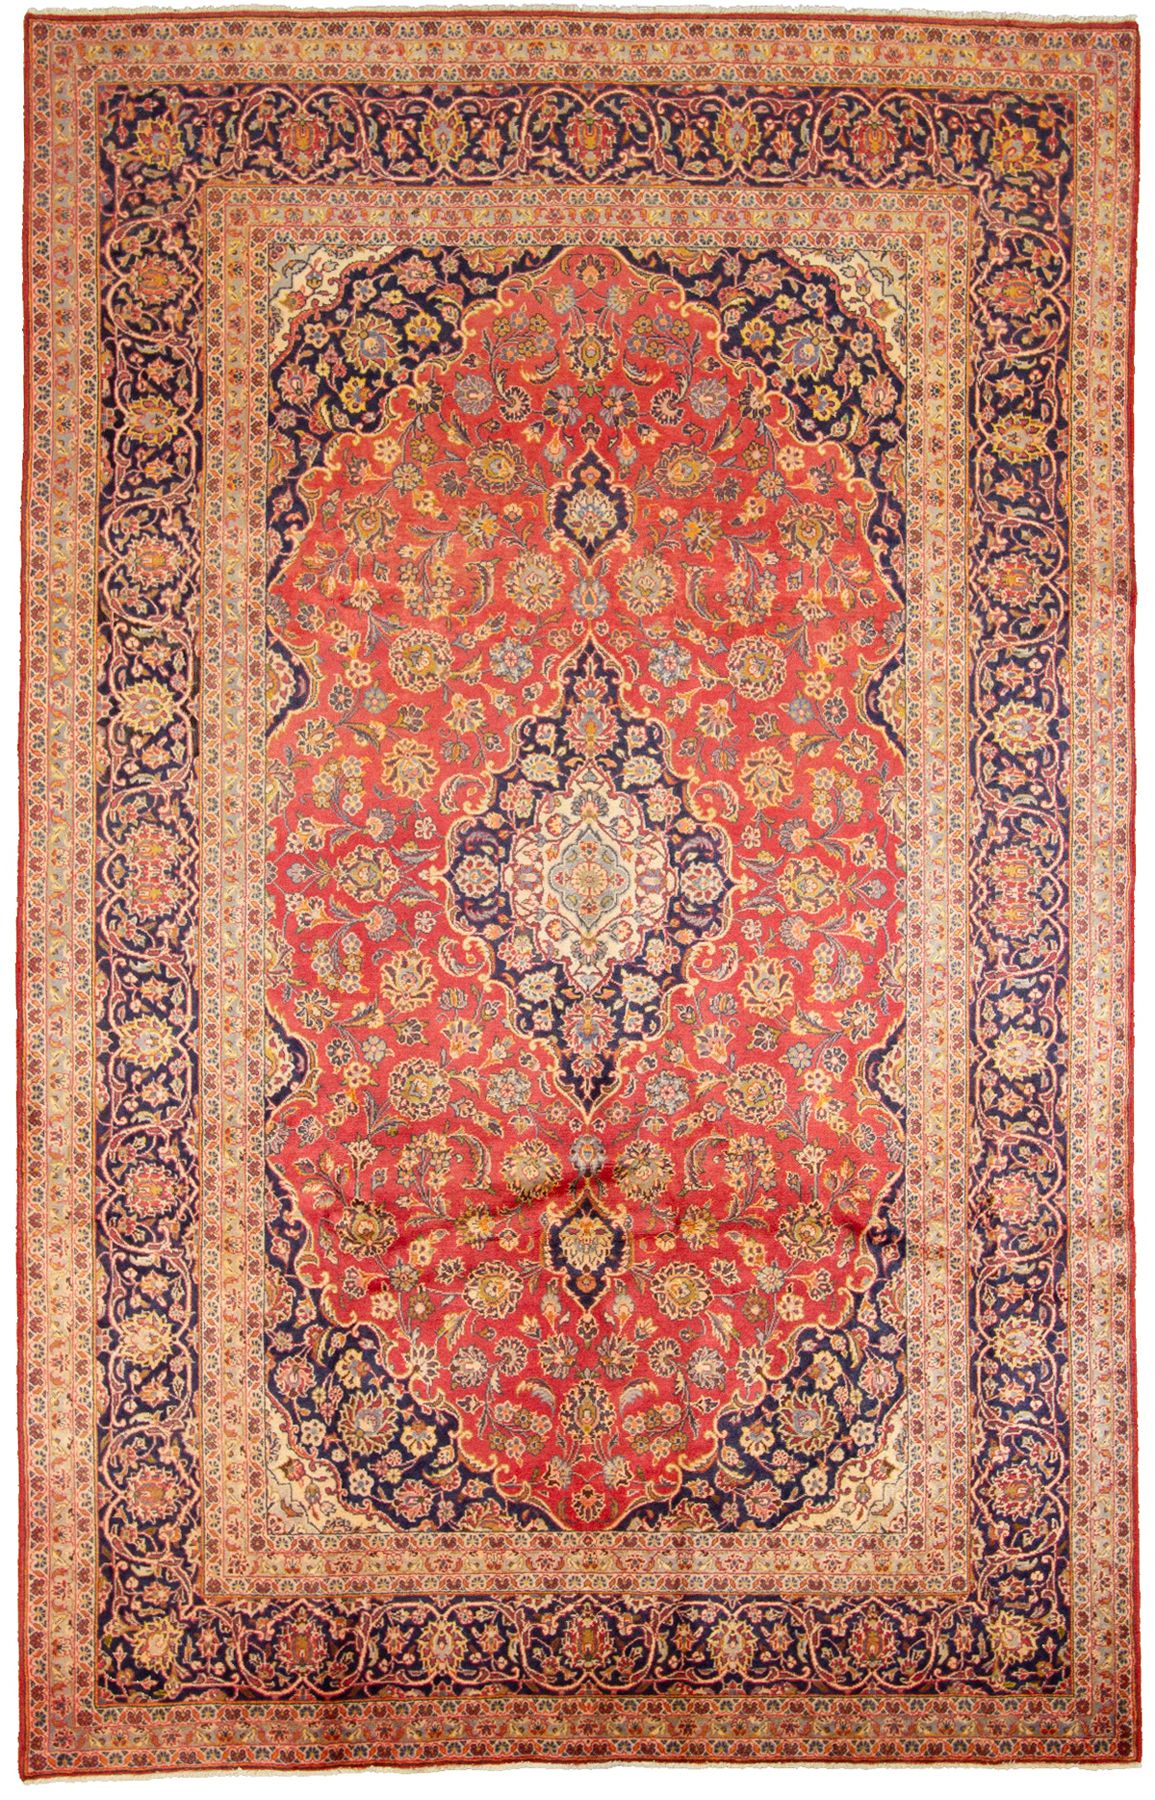 Hand-knotted Kashan  Wool Rug 6'6" x 10'2" Size: 6'6" x 10'2"  